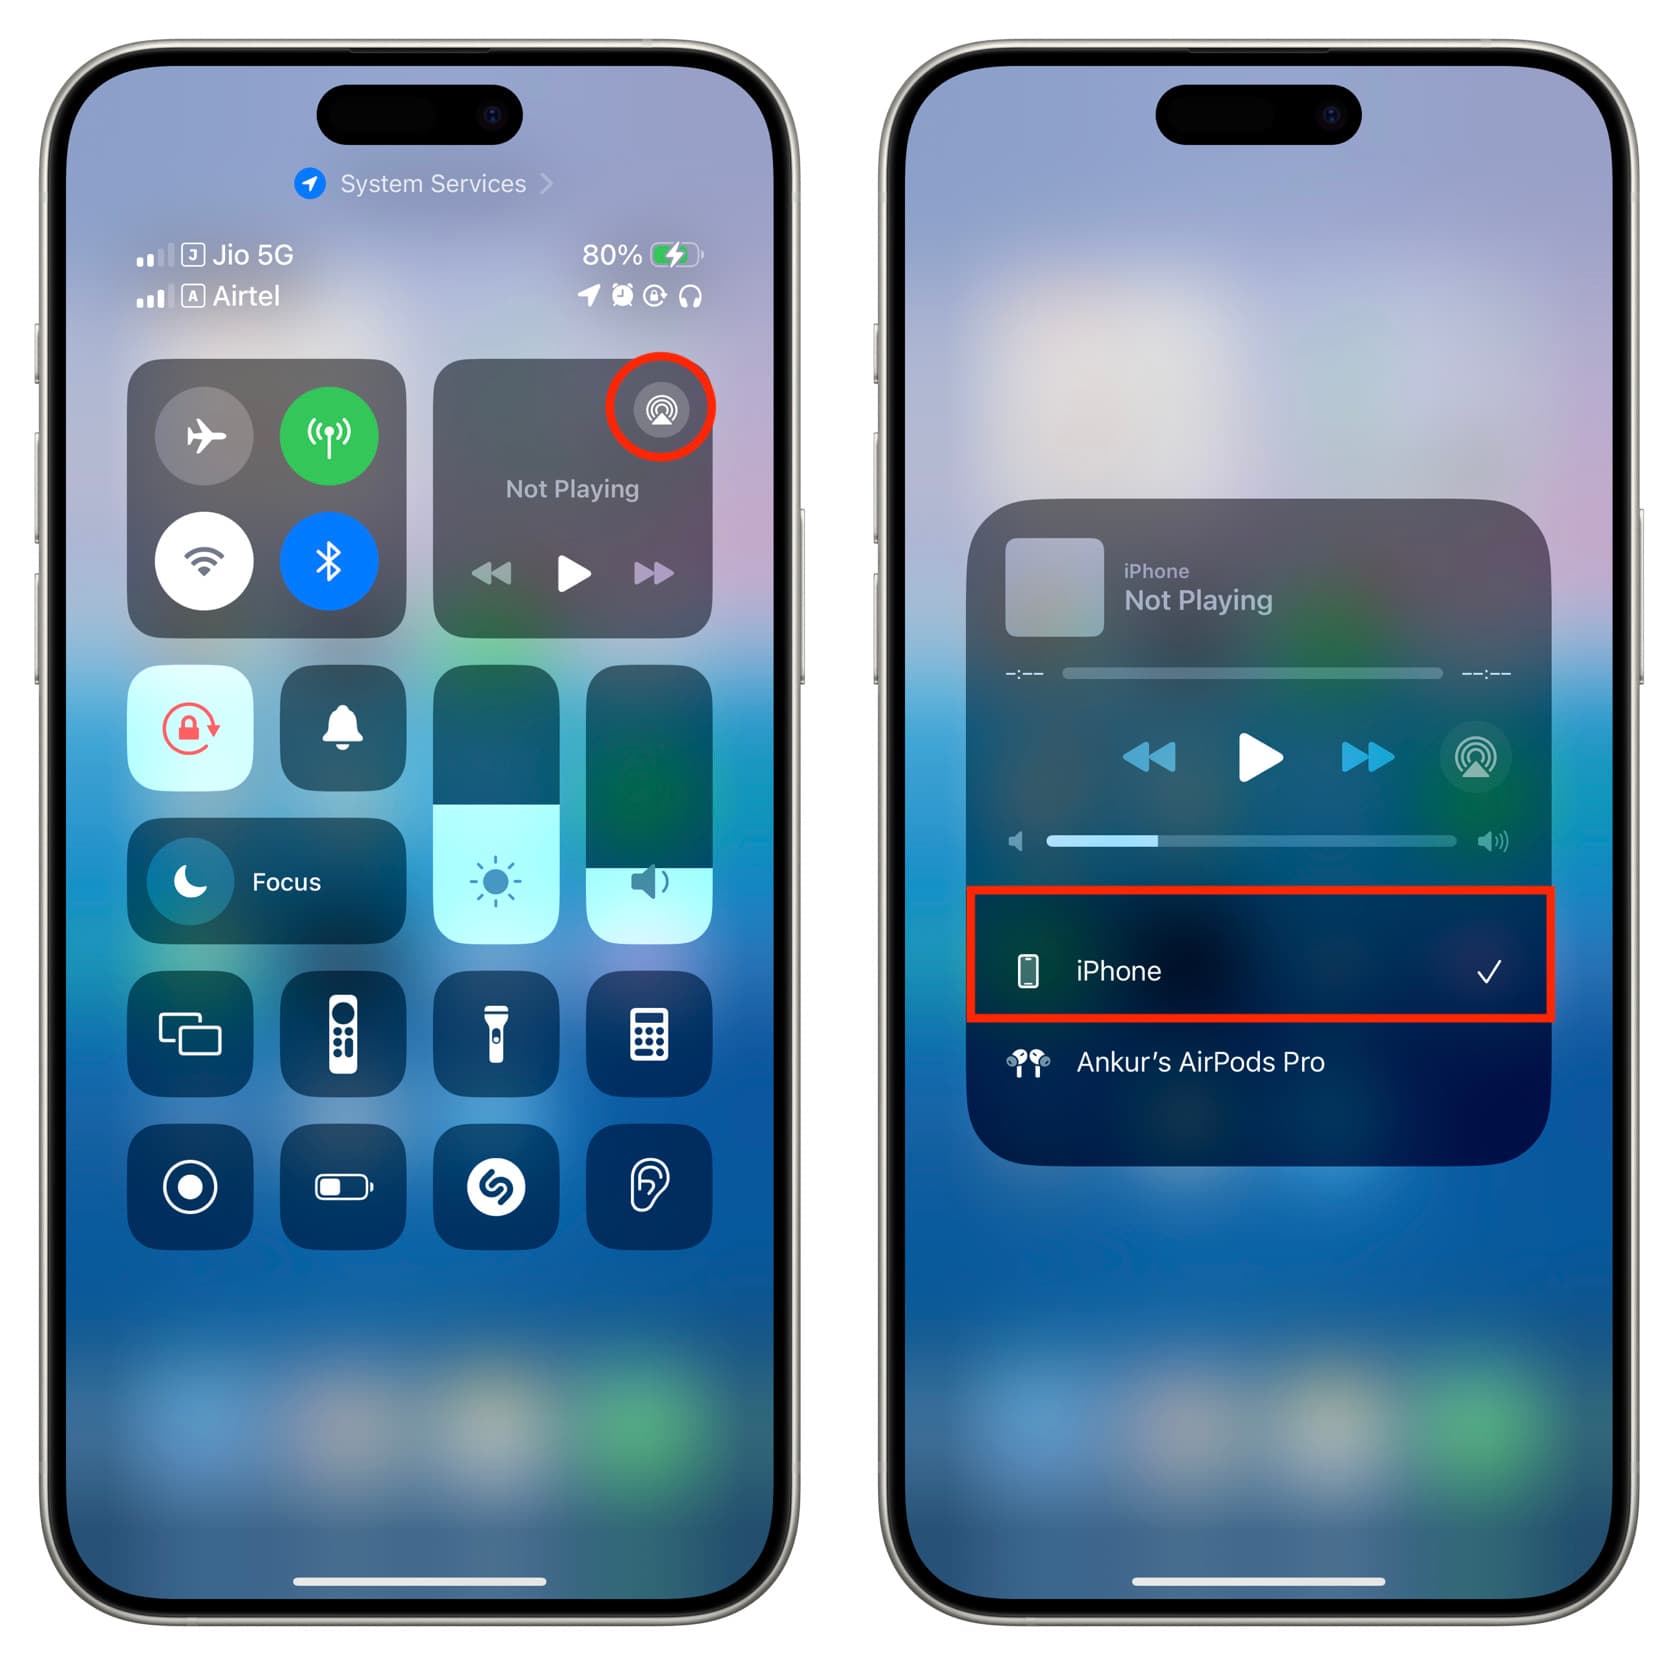 Select iPhone as sound output from Control Center